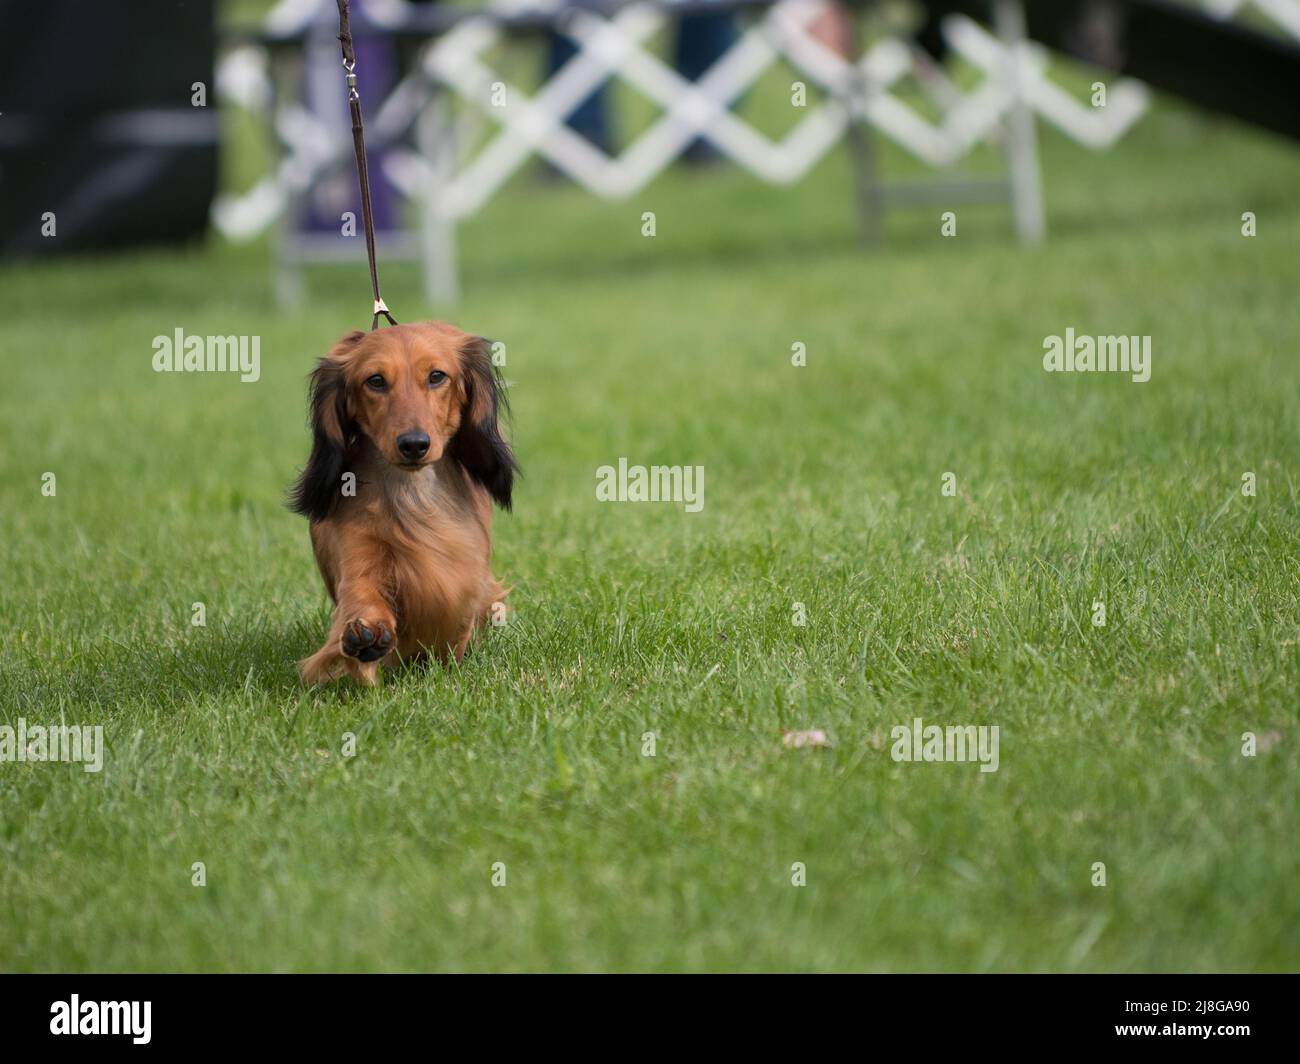 Longhaired Dachshund walking in the conformation ring during a dog show Stock Photo